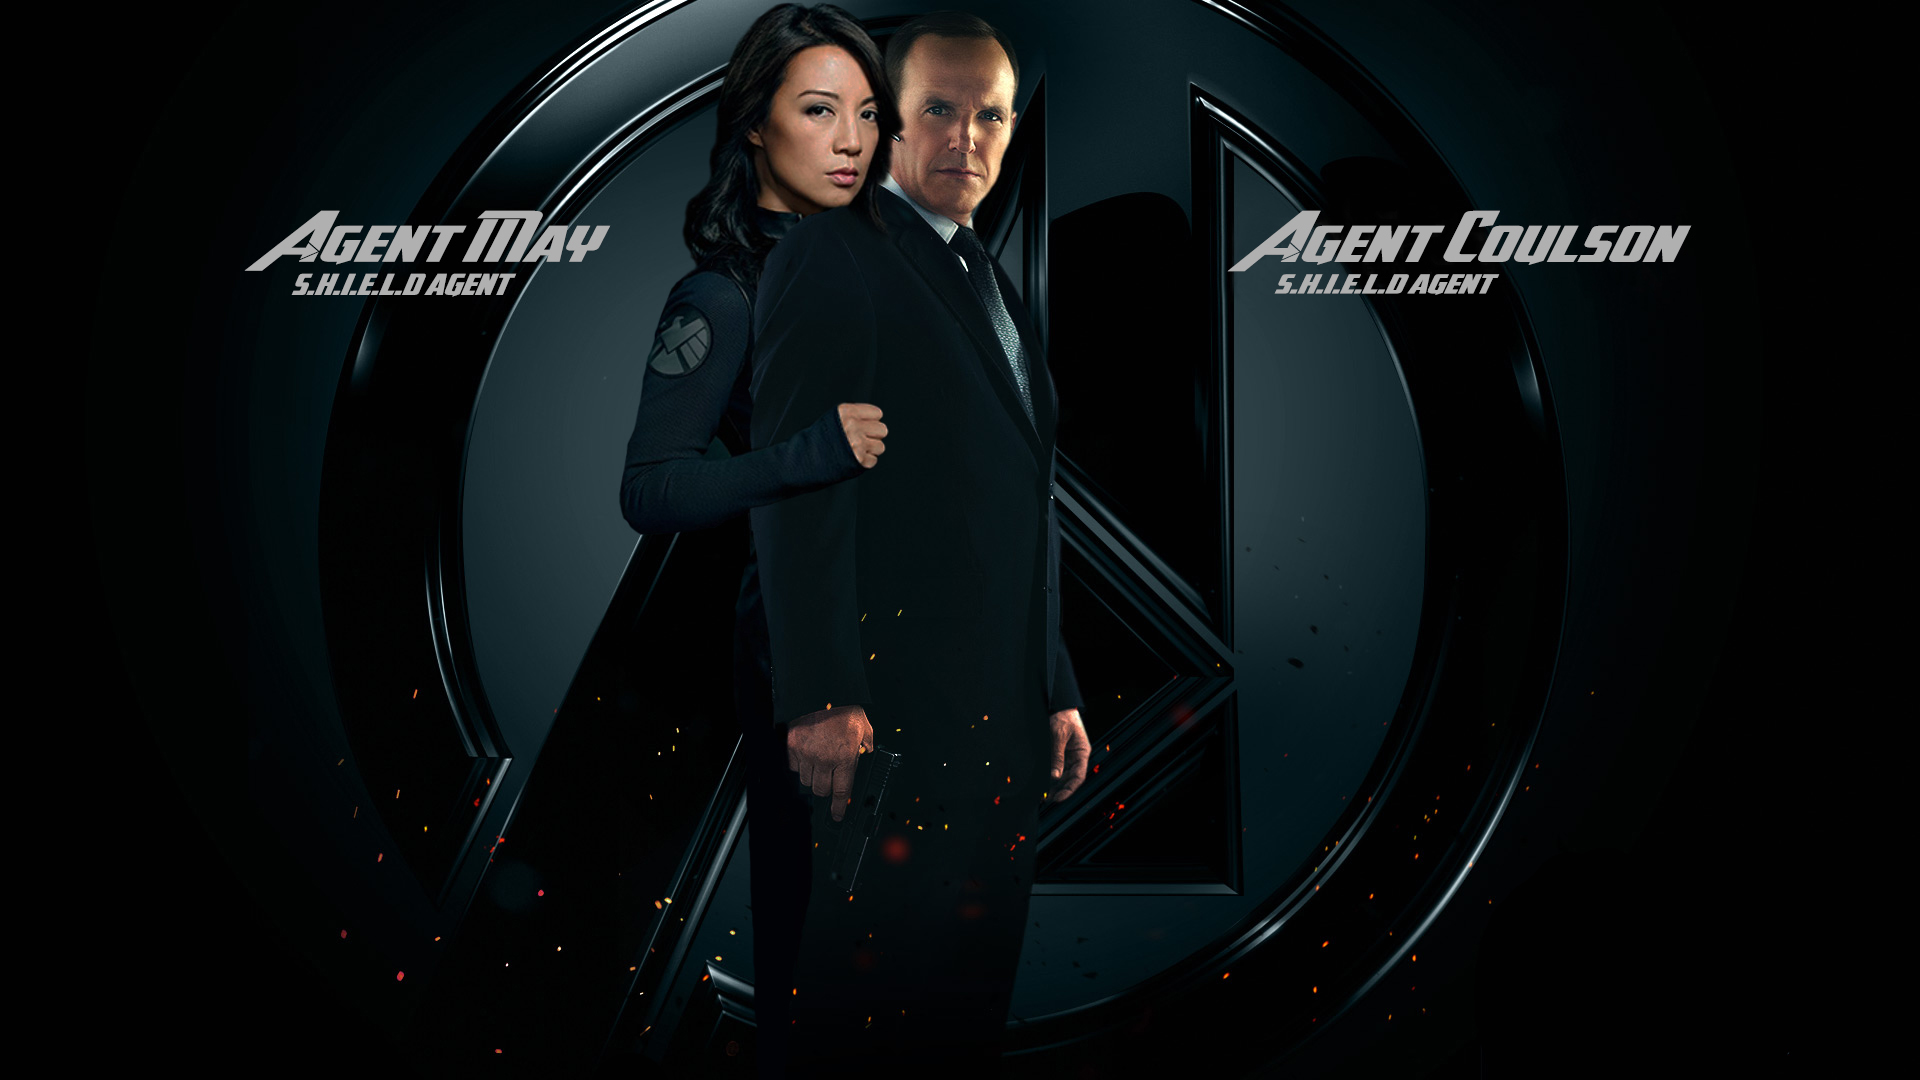 Agents of SHIELD Backgrounds Wallpaper High Definition High